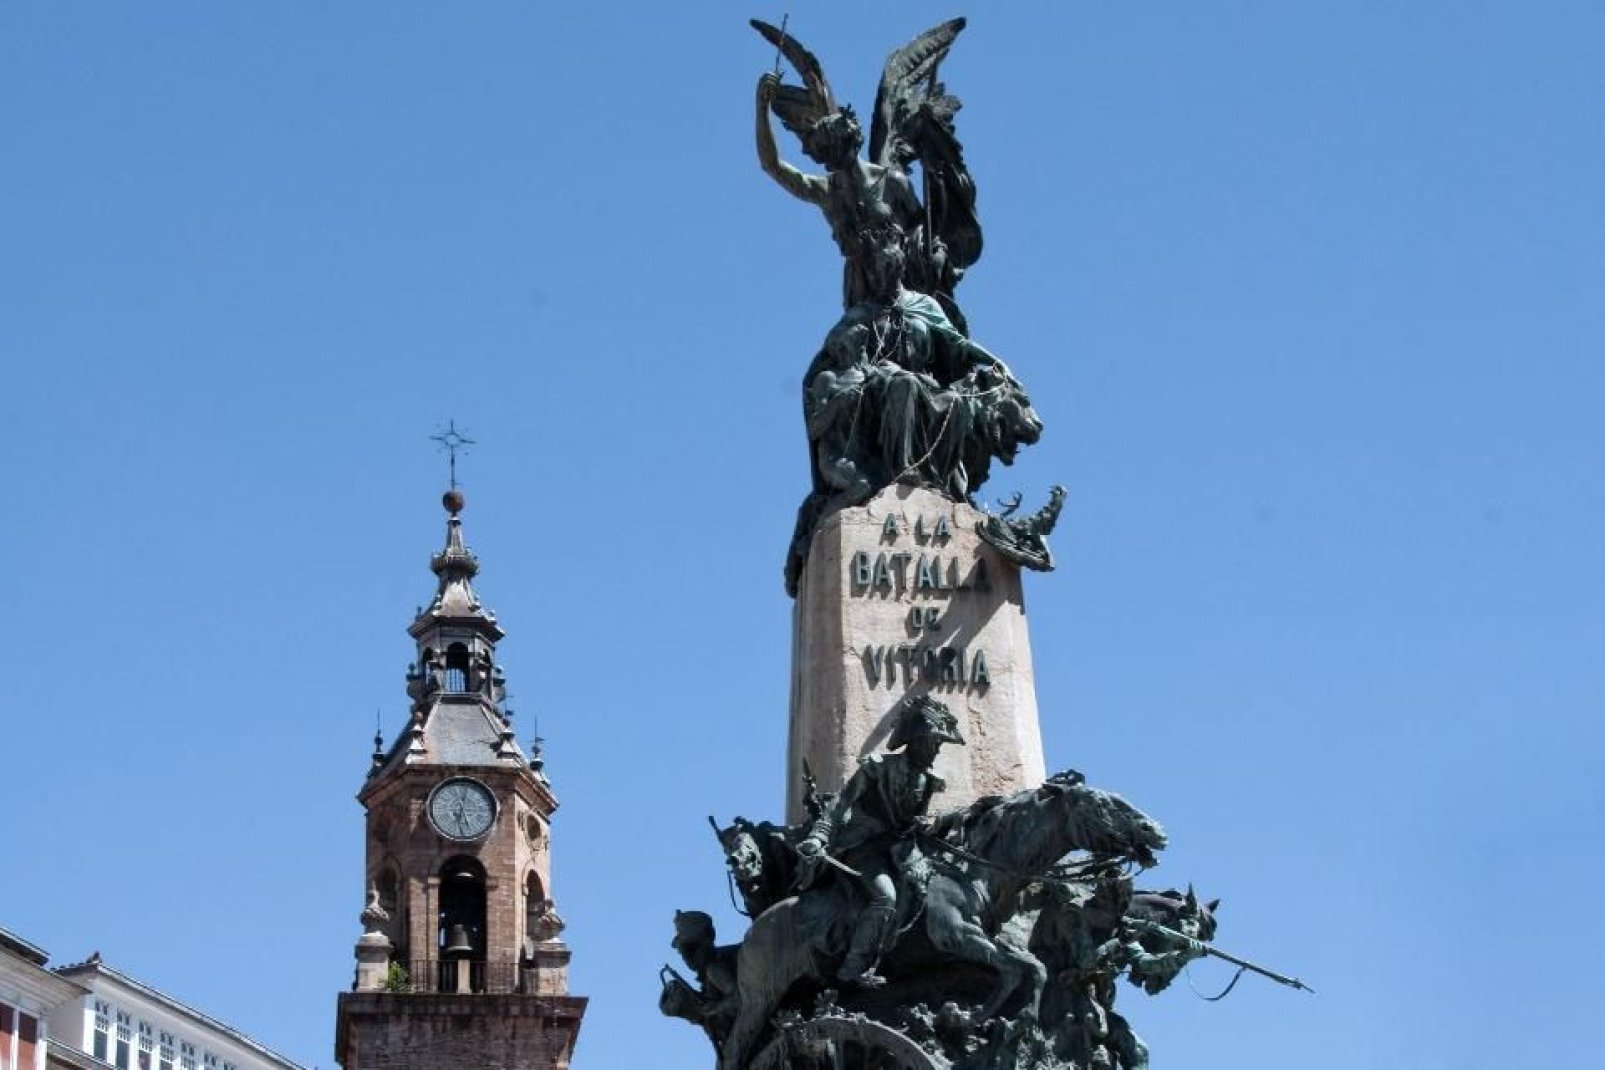 The monument in the center of the Plaza de la Virgen Blanca, commemorates the Battle of Vitoria during the War of Independence.